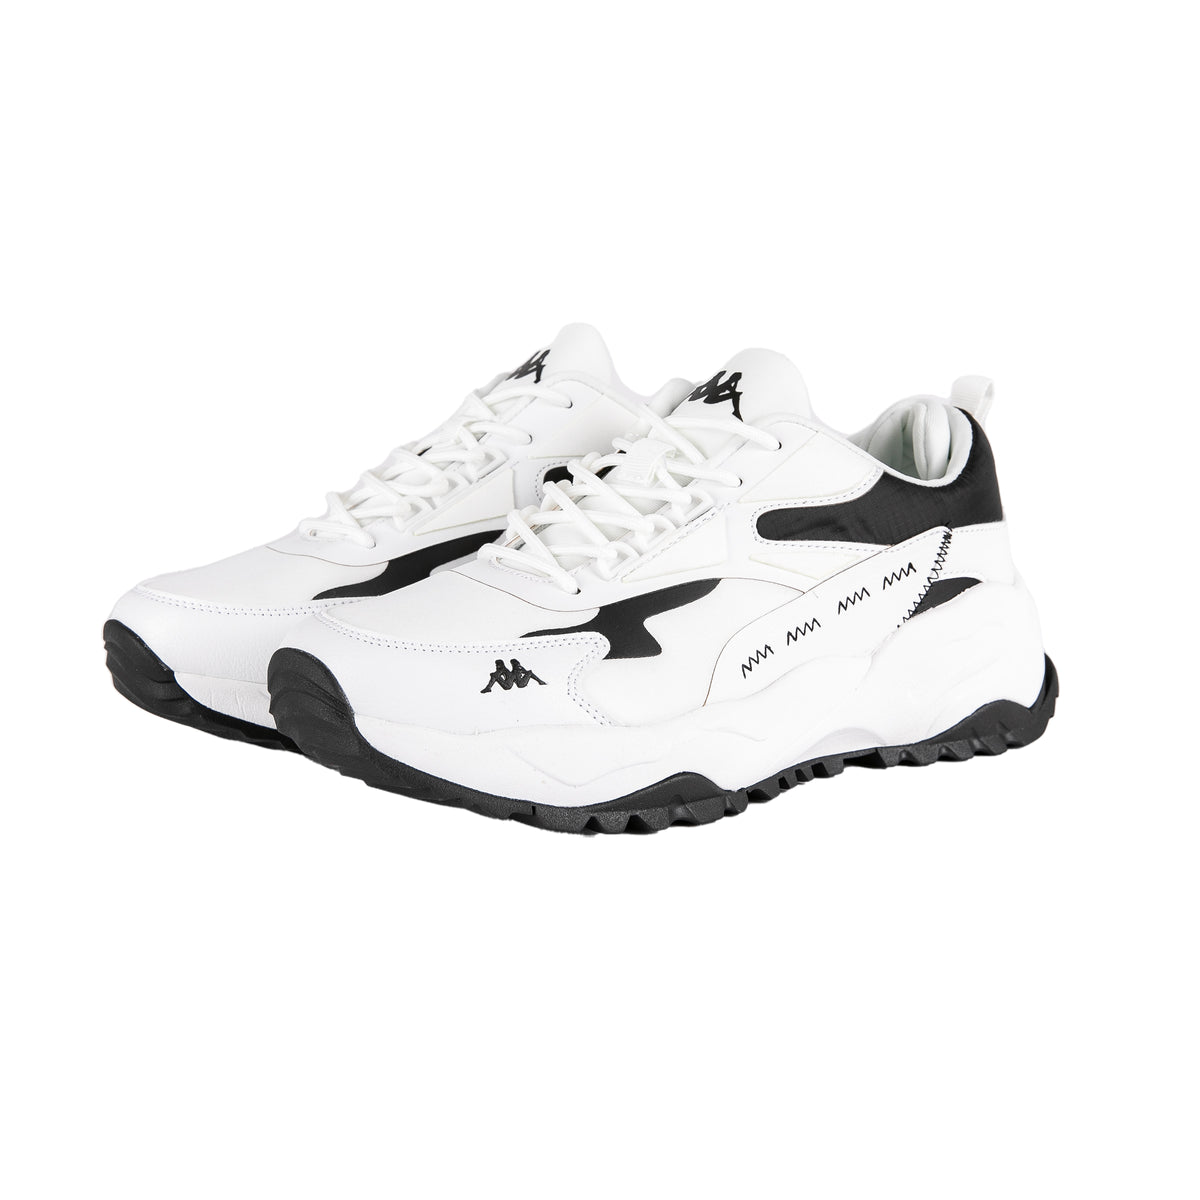 Shop online for Authentic Sneakers 3 - Kappa Black Altin US White